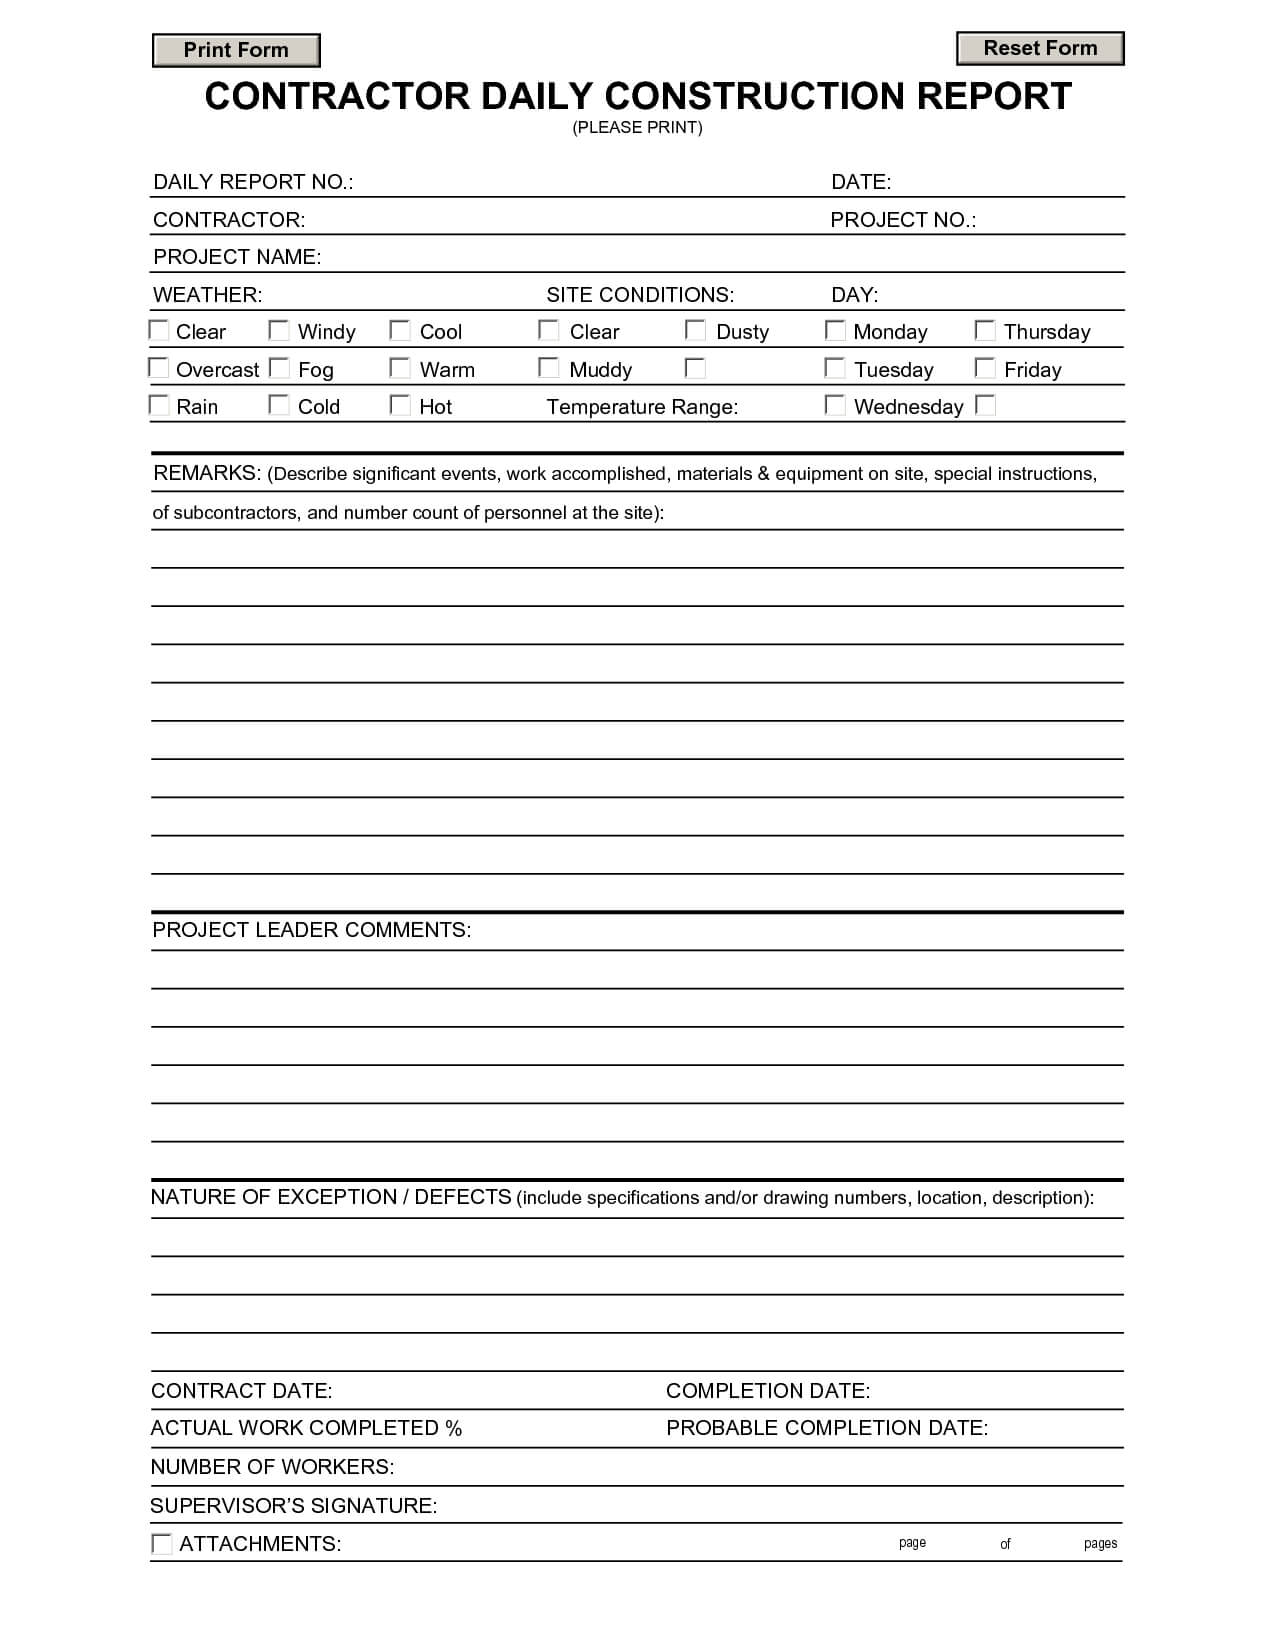 Construction Daily Report Template | Contractors | Report Throughout Construction Deficiency Report Template